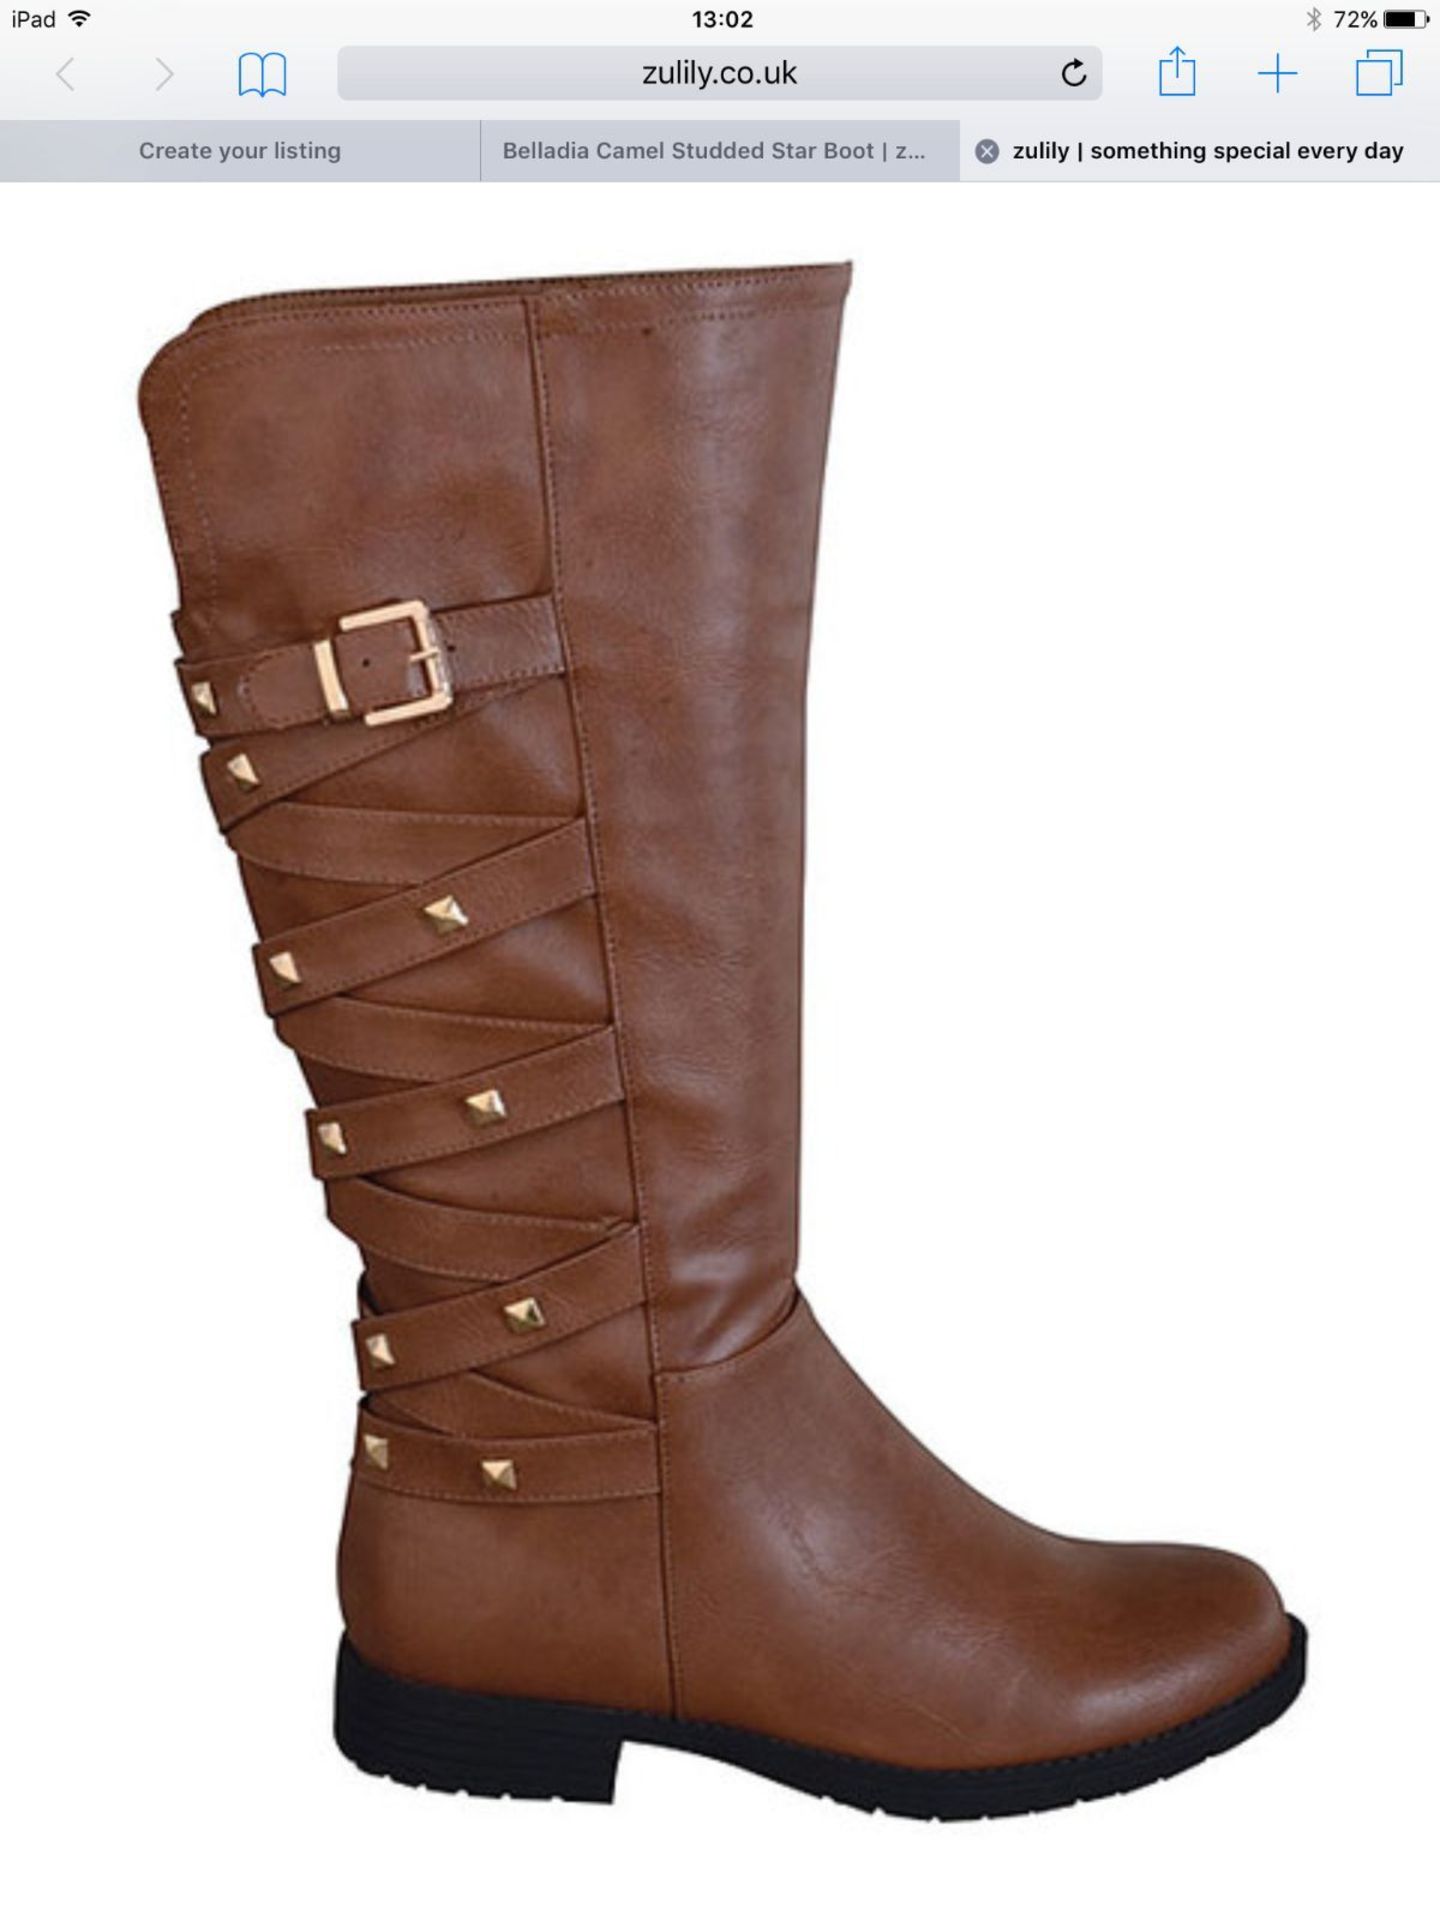 Belladia Camel Studded Star Boot, Size Eur 40.5, RRP £60.99 (New with box) [Ref: ]